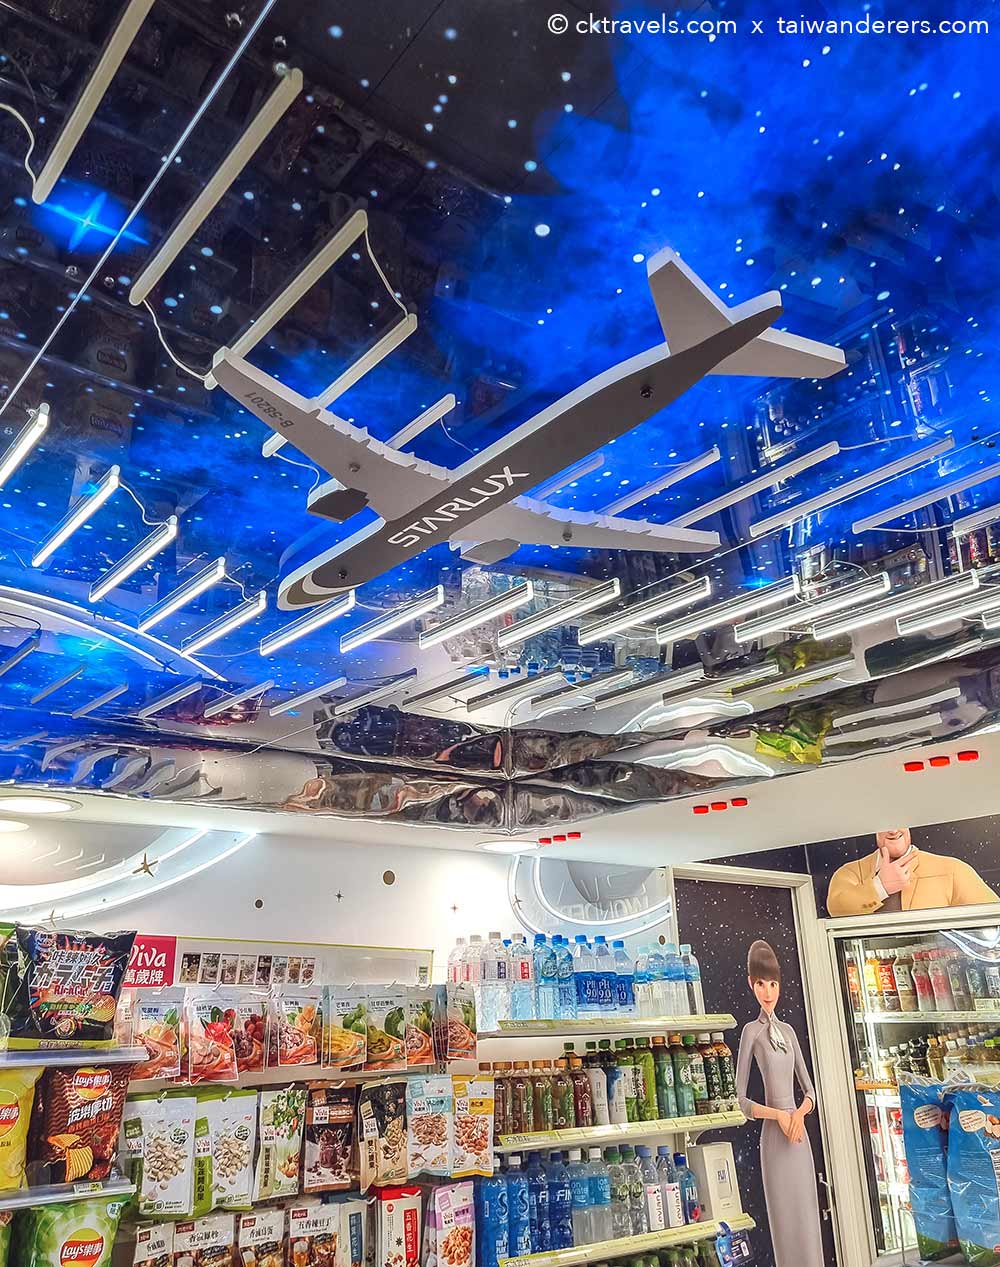 Starlux themed 7-eleven convenience store in Taipei Taiwan